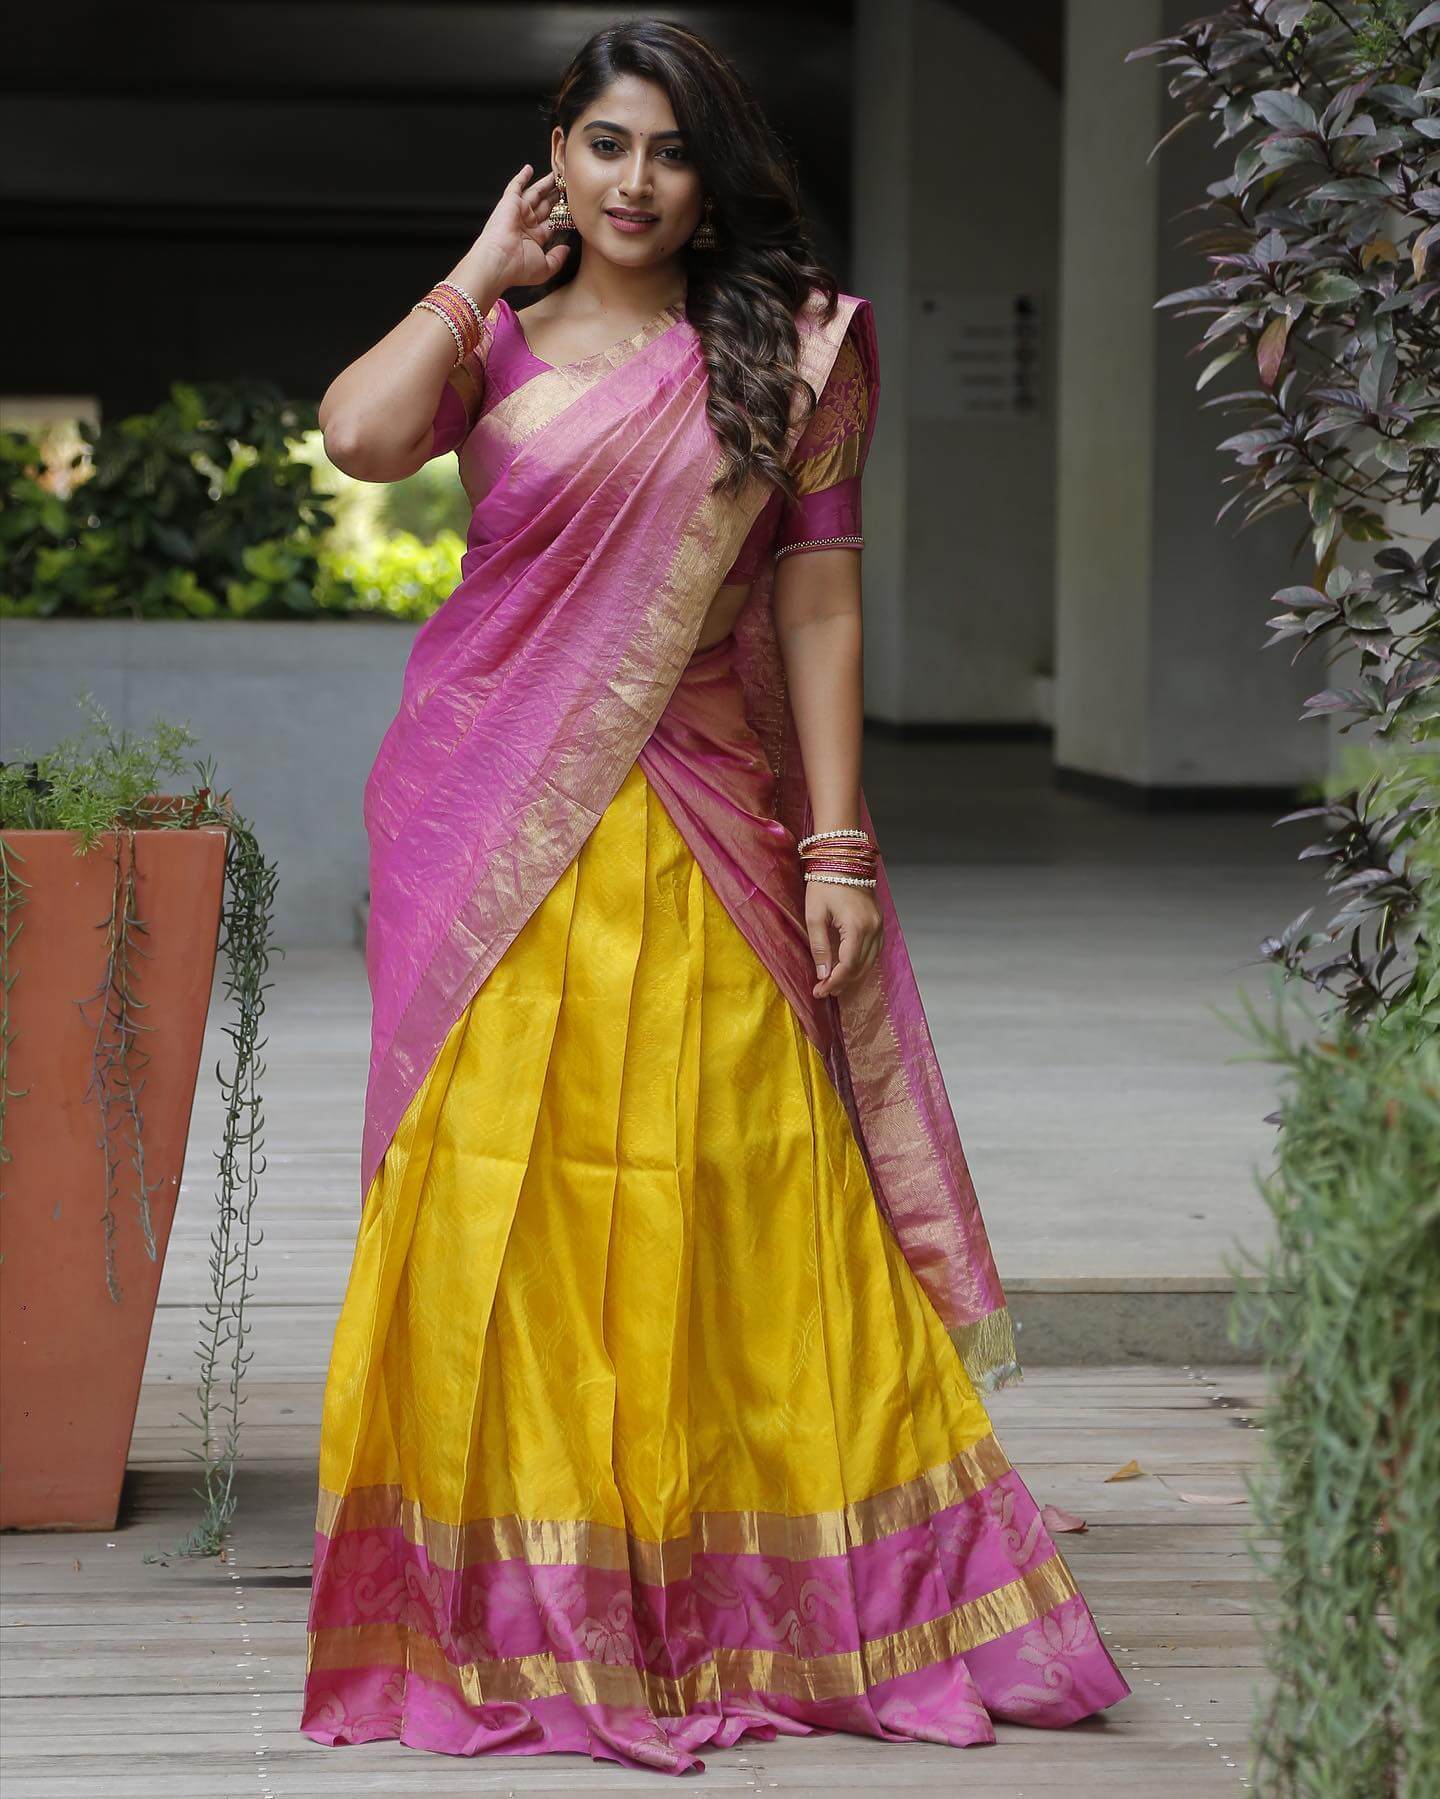 Nishvika Naidu In Traditional South Indian Silk Yellow & Pink Lehenga Best For Festive Occasions